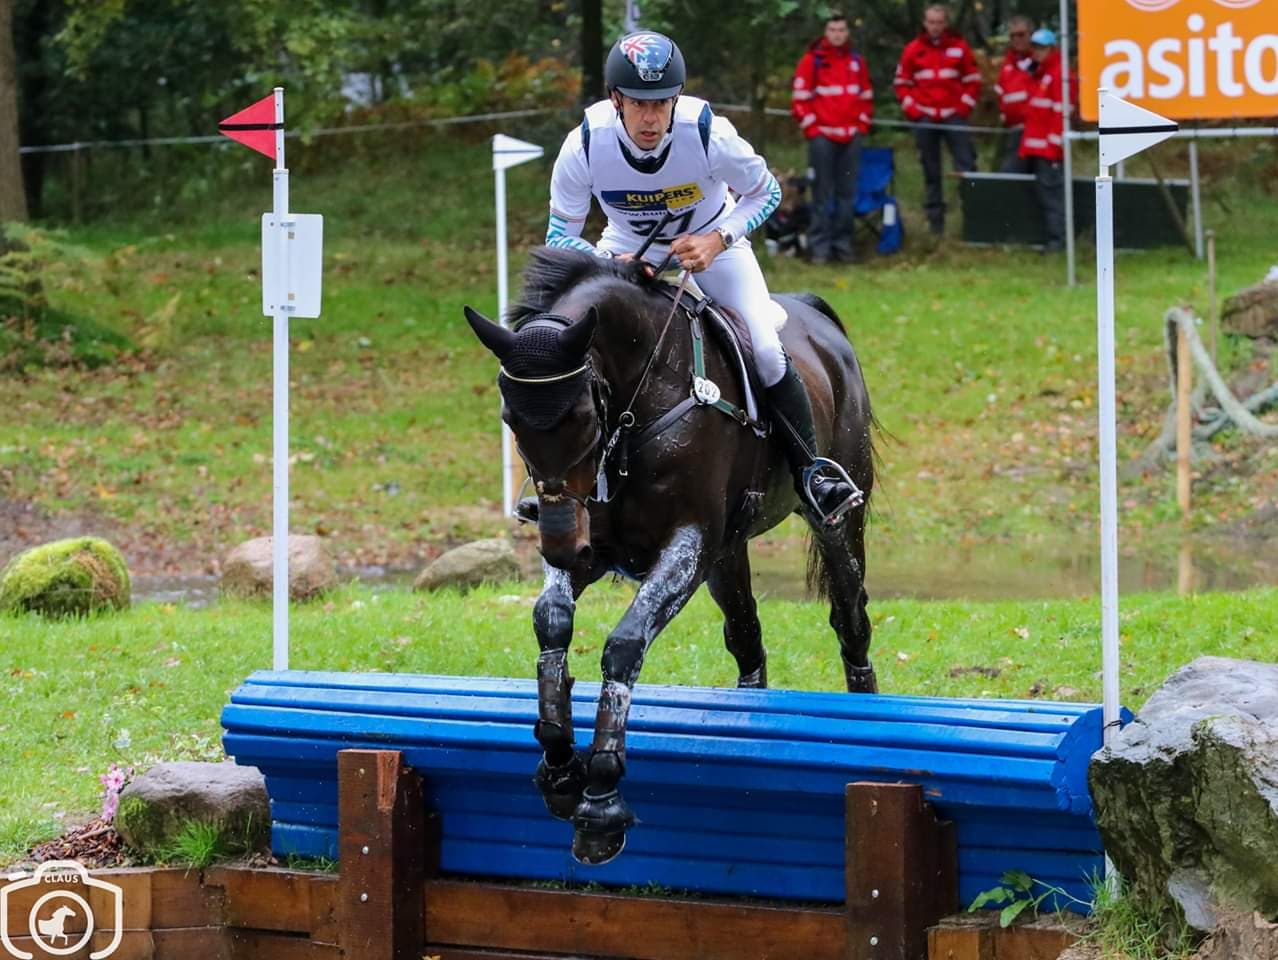 Nelson Pessoa is new coach of Australian eventing team